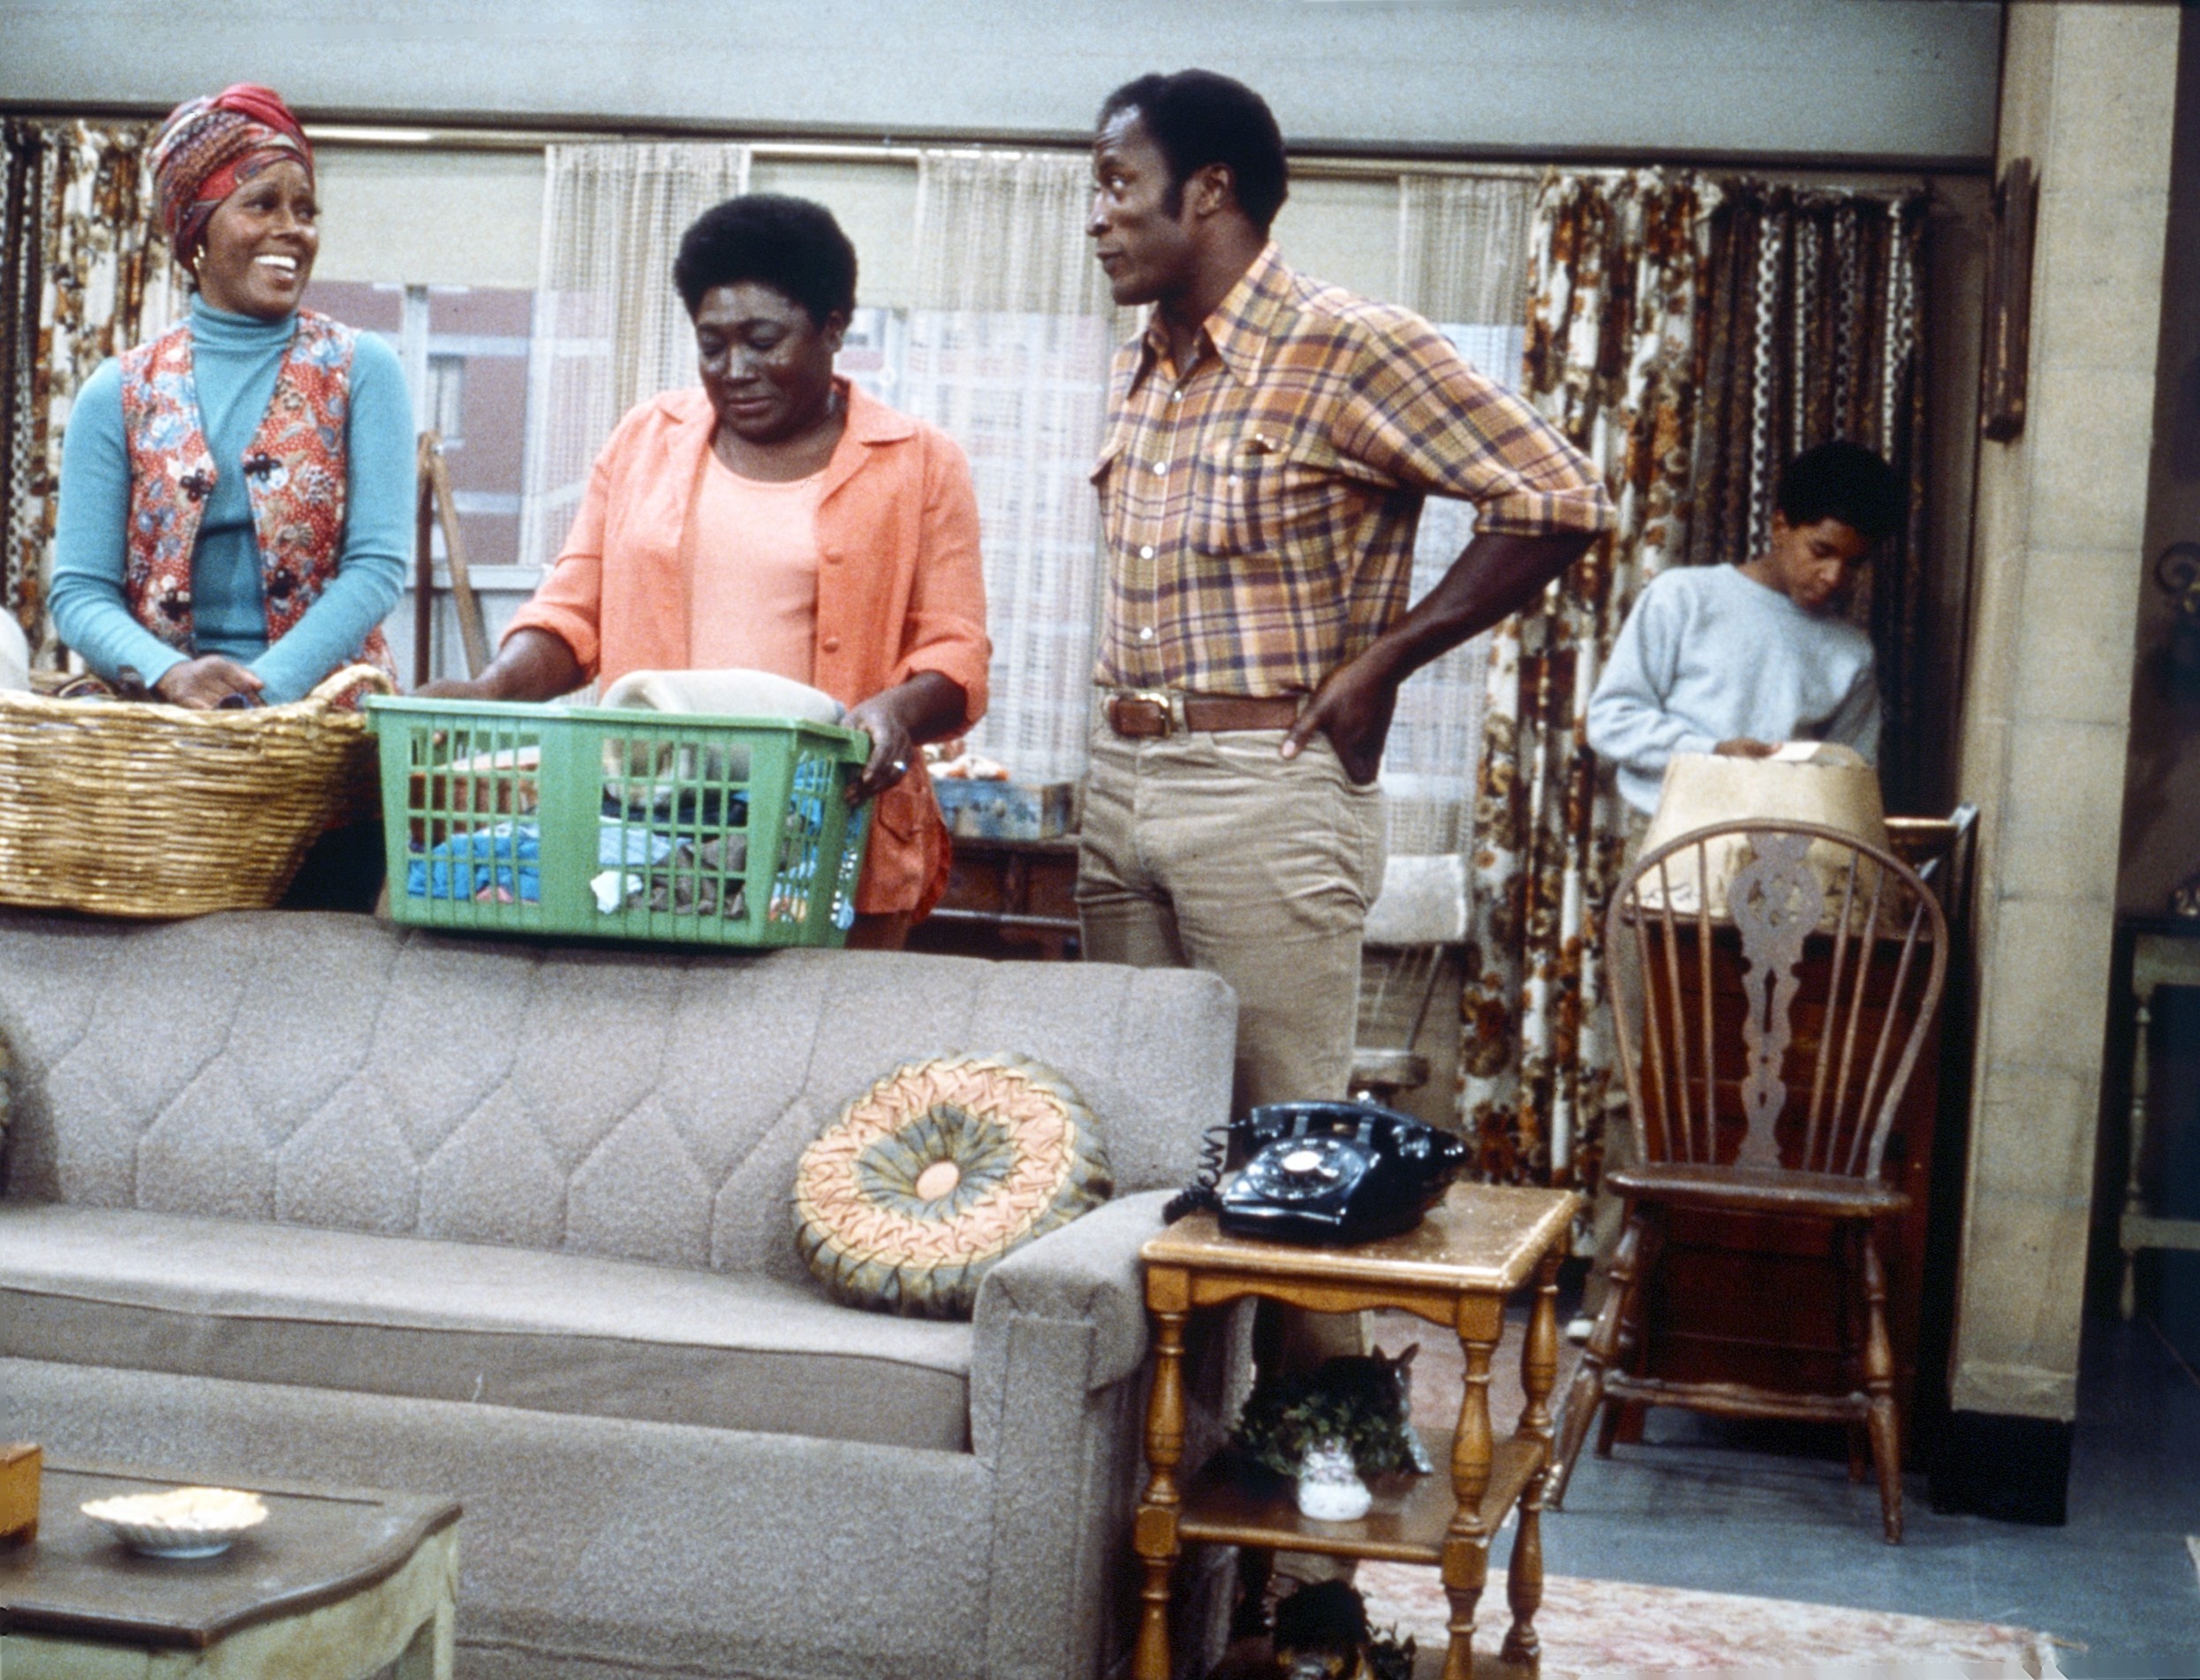 A family on the set of Good Times.